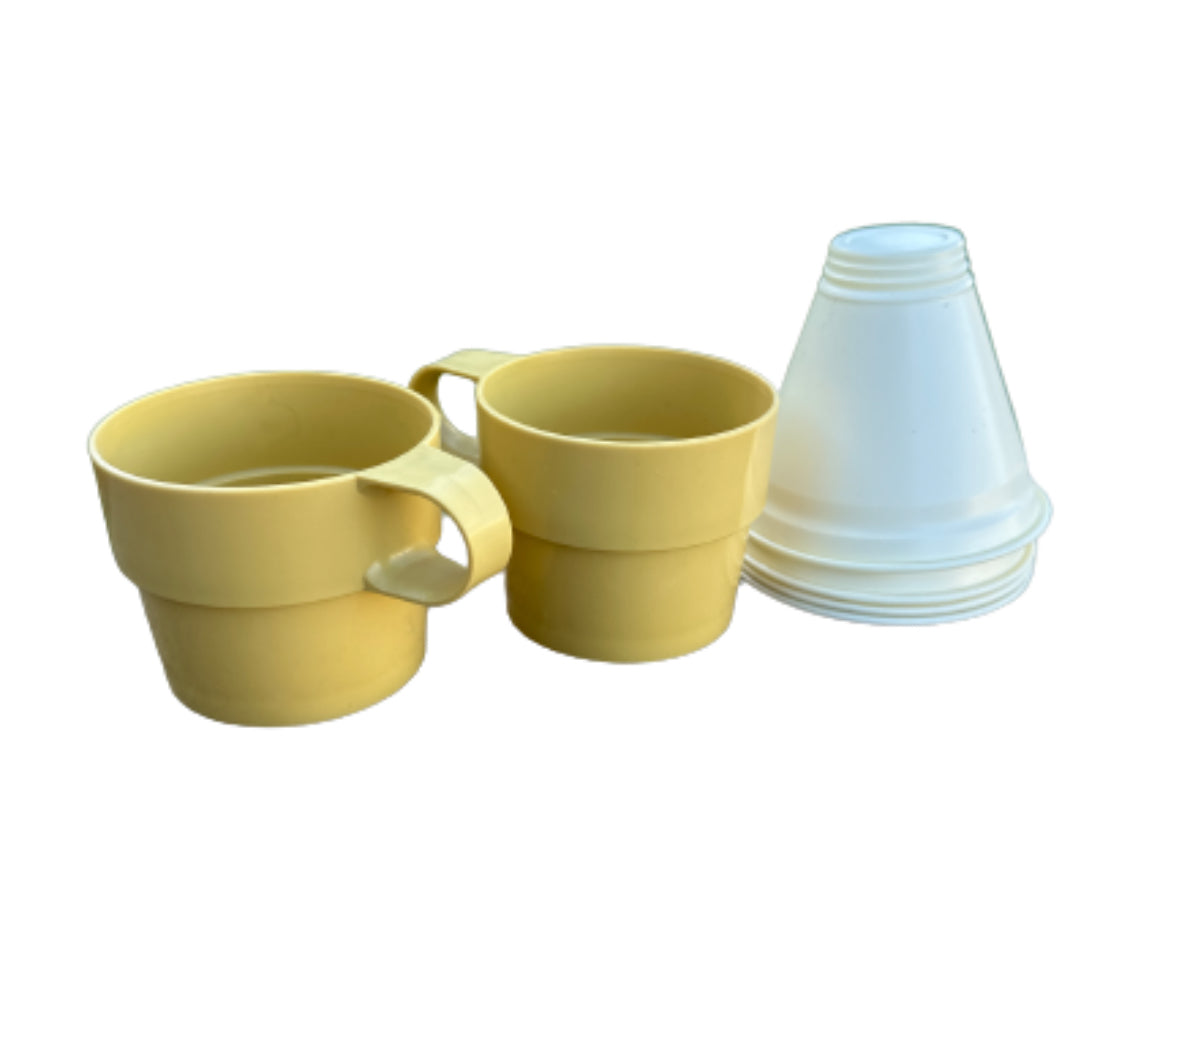 MAD MEN: Donald and Draper's Vintage Solo Cozy Coffee Cups & Lily Filters